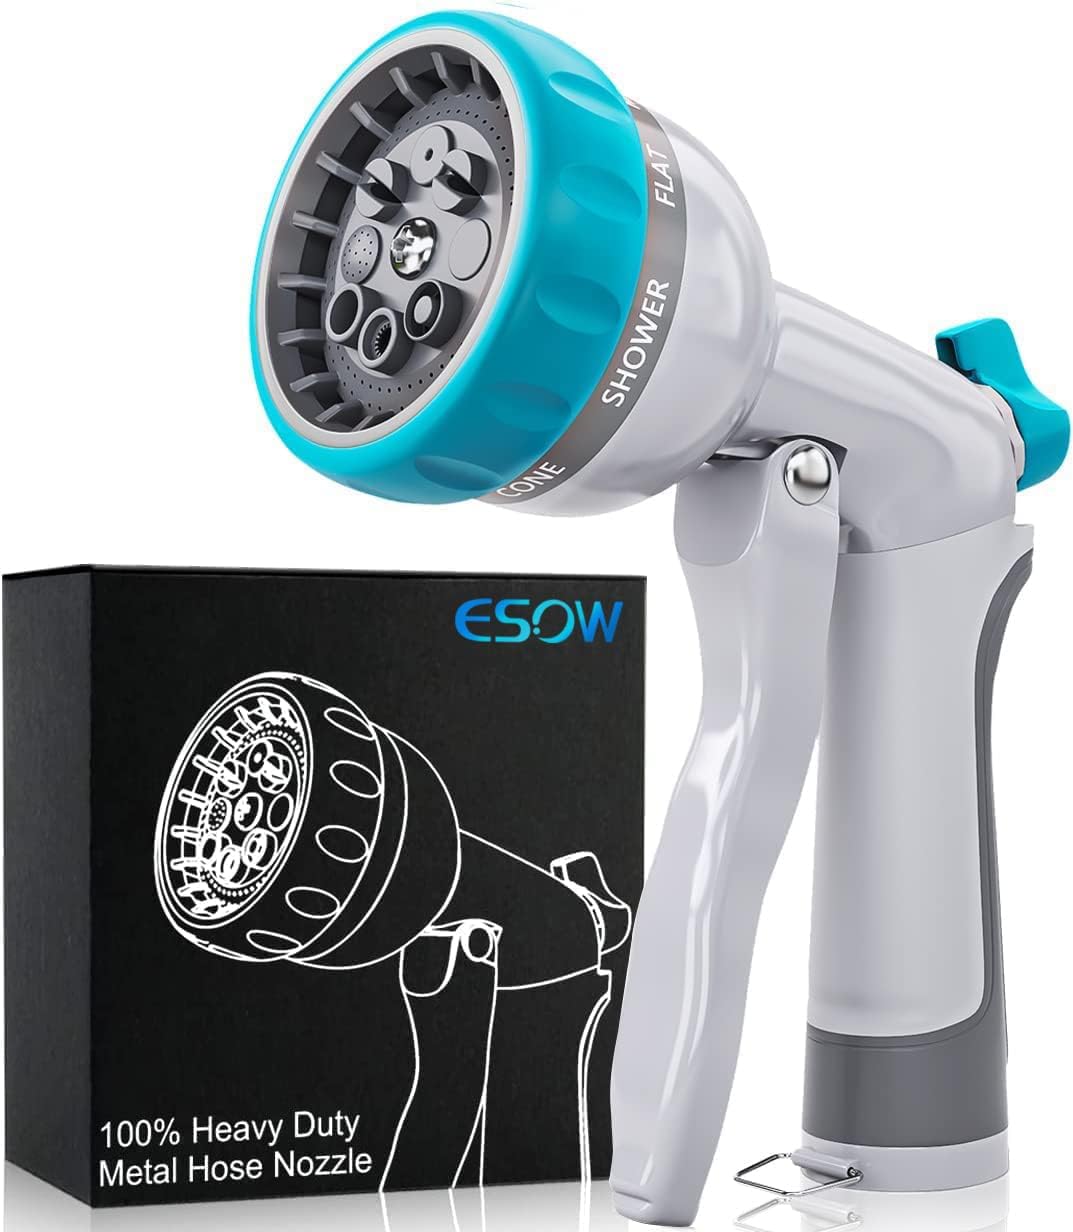 ESOW Garden Hose Nozzle Heavy Duty, 8 Adjustable Patterns Metal Water Hose Nozzle, High Pressure Hand Sprayer with Flow Control, Best for Watering Plant & Lawn, Pets Shower, Car Washing, Cyan